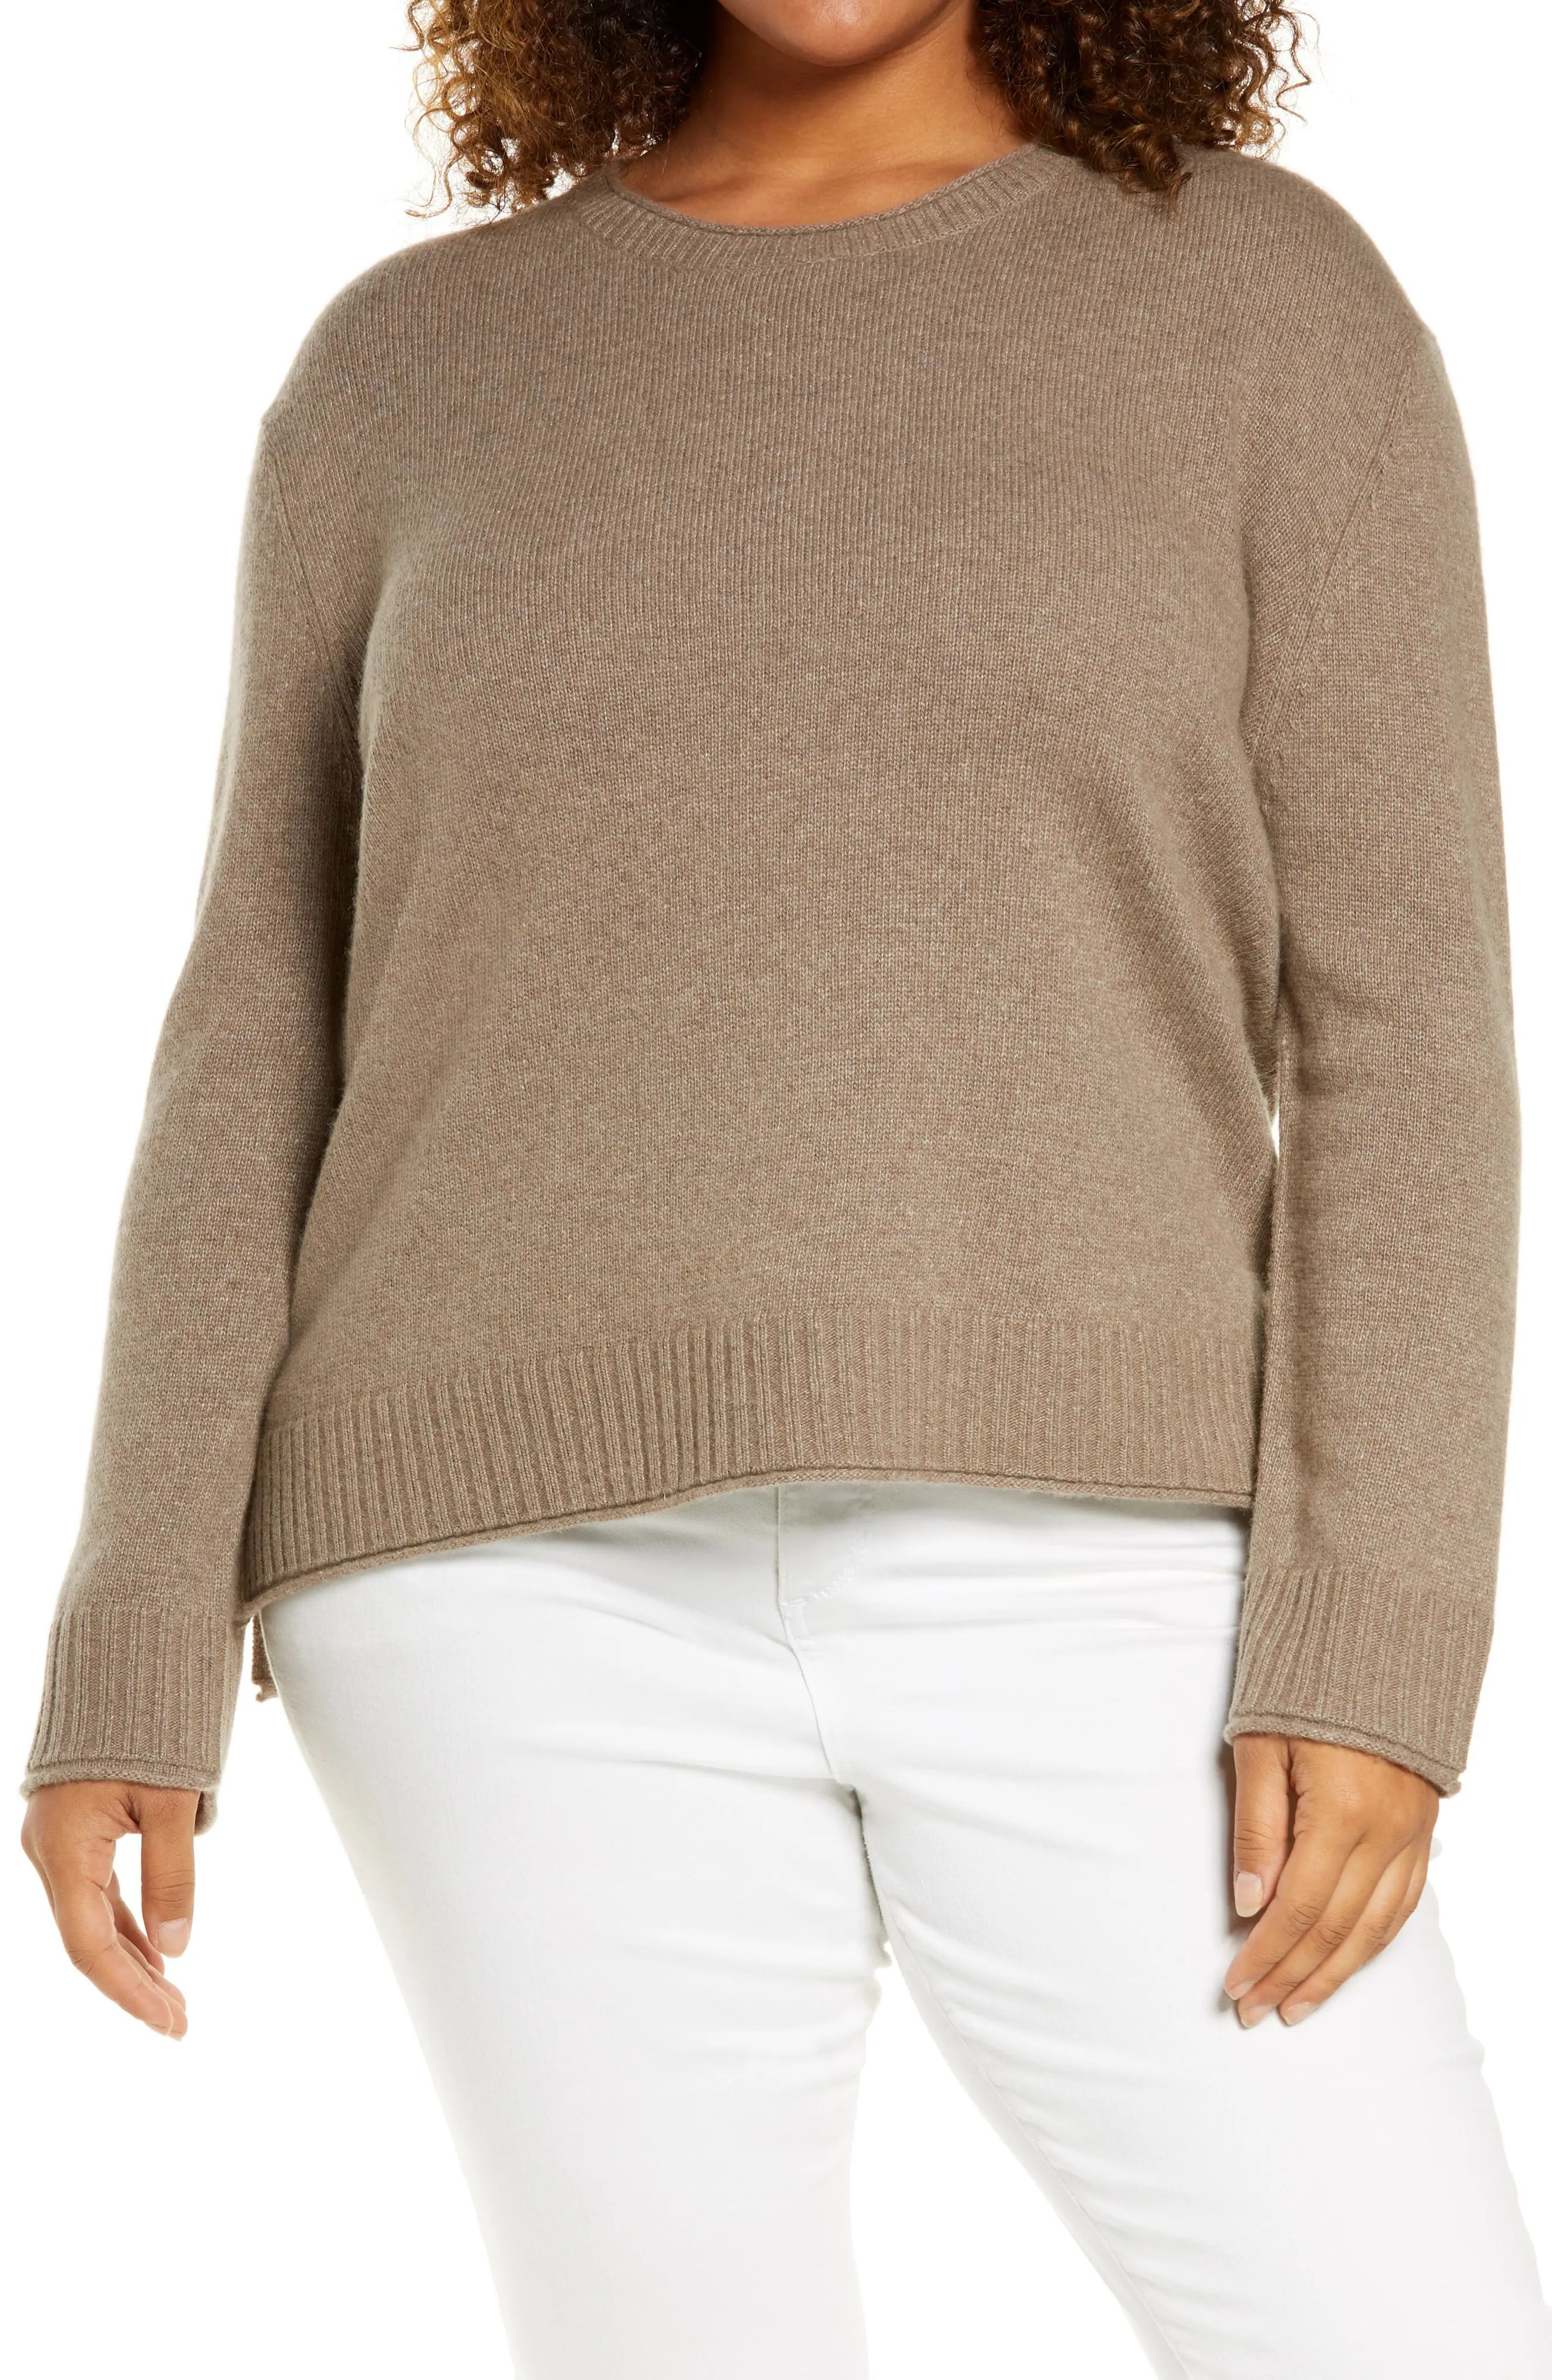 Jenni Kayne Everyday Sweater, Size 2X in Taupe at Nordstrom | Nordstrom